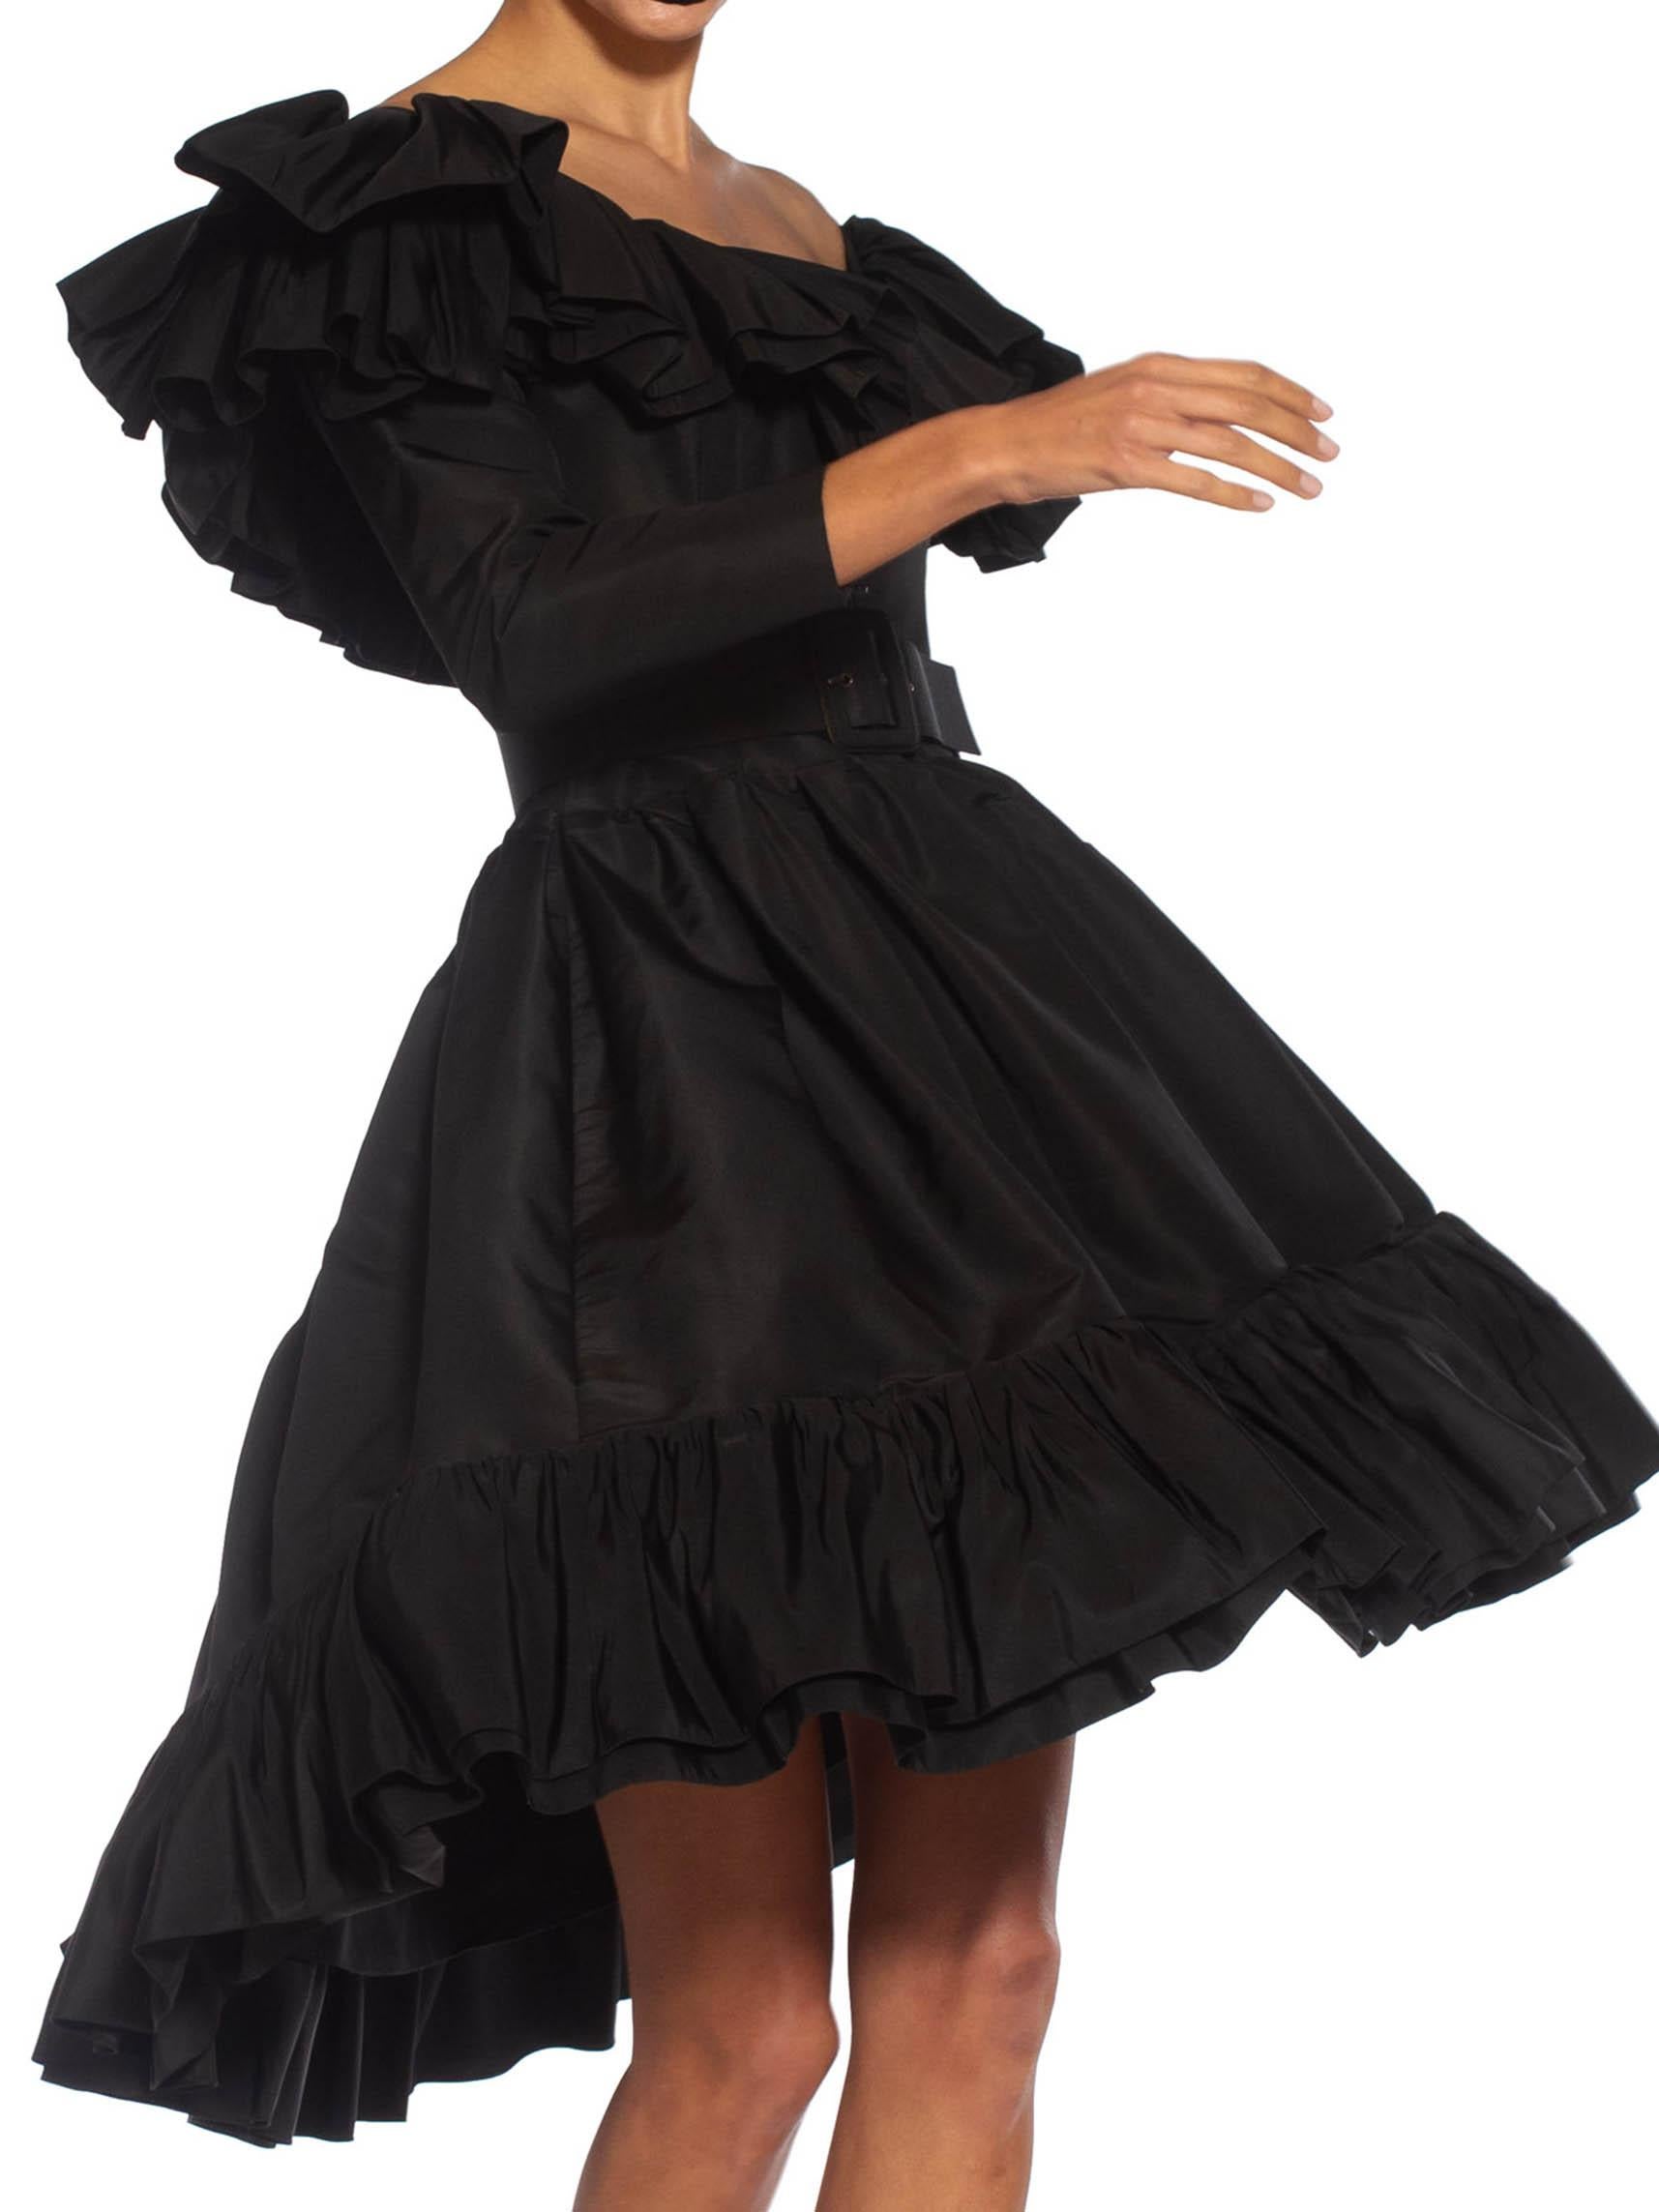 1980S YVES SAINT LAURENT Black Haute Couture Silk Taffeta Ruffled Cocktail Dres In Excellent Condition For Sale In New York, NY